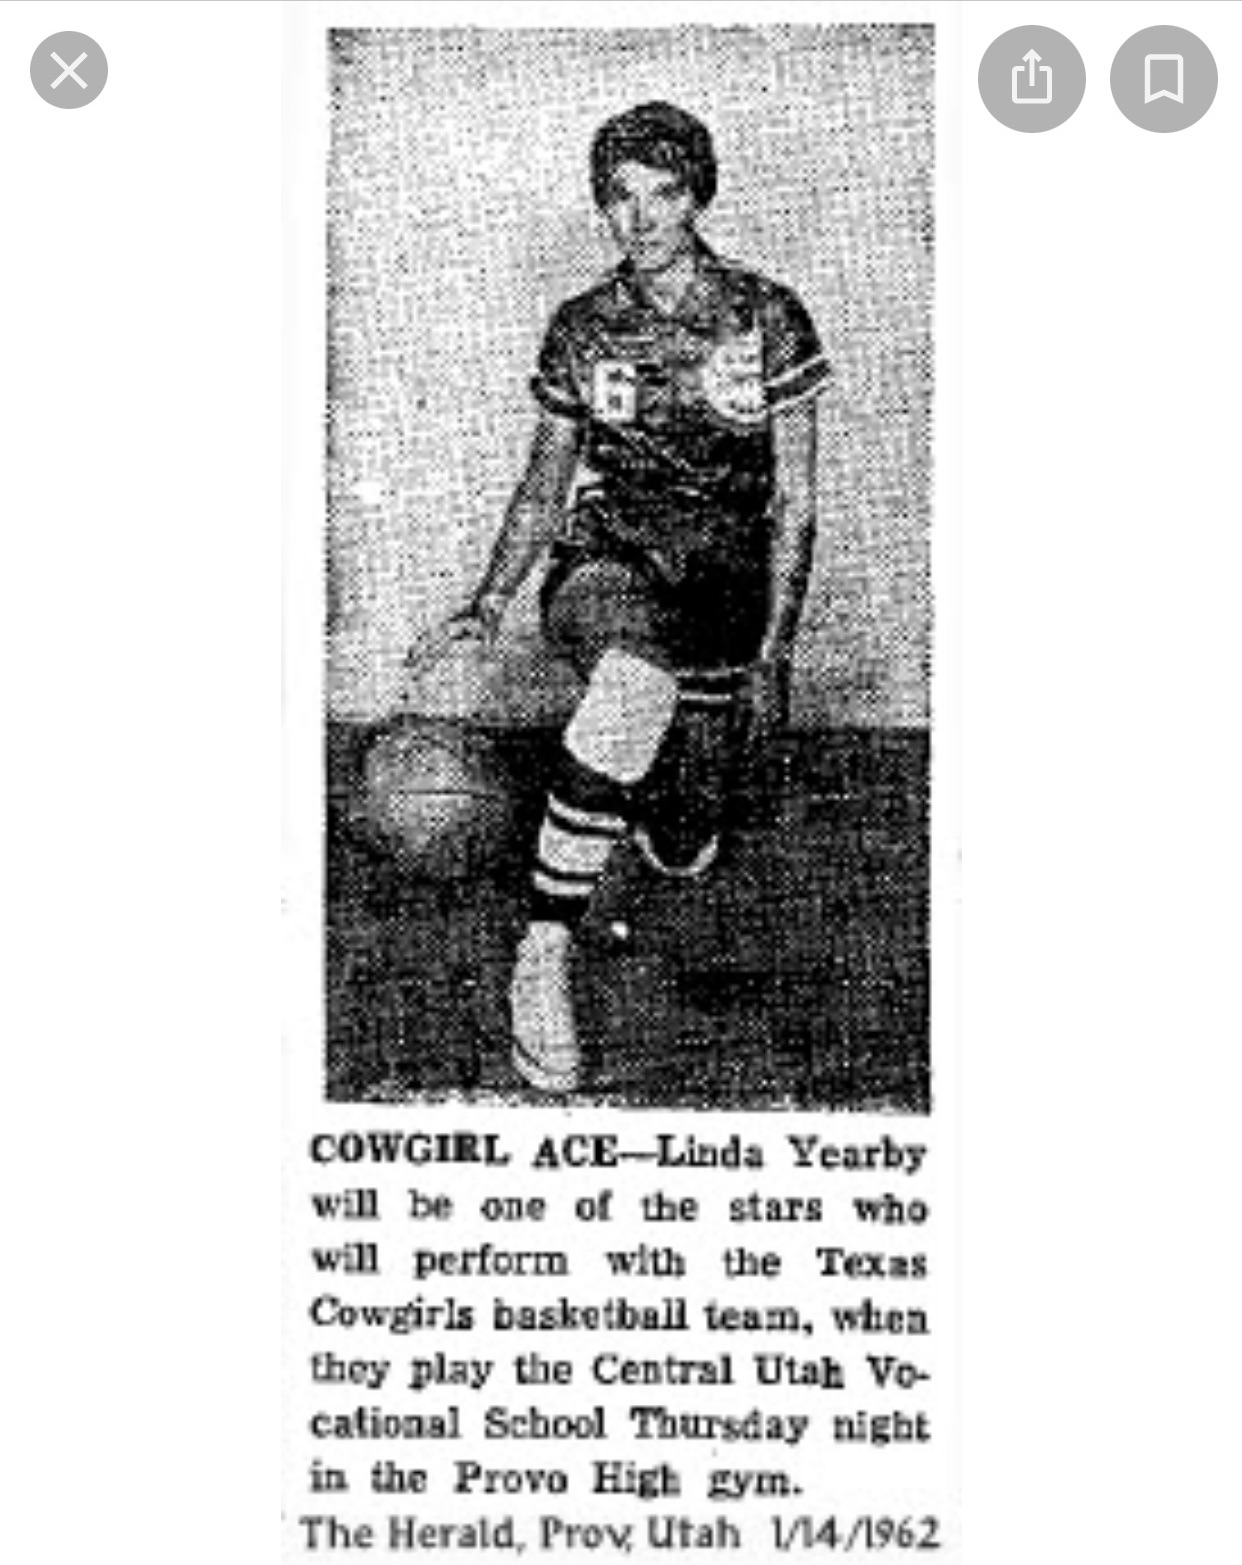 Linda Yearby plays for the Texas Cowgirls Basketball Team